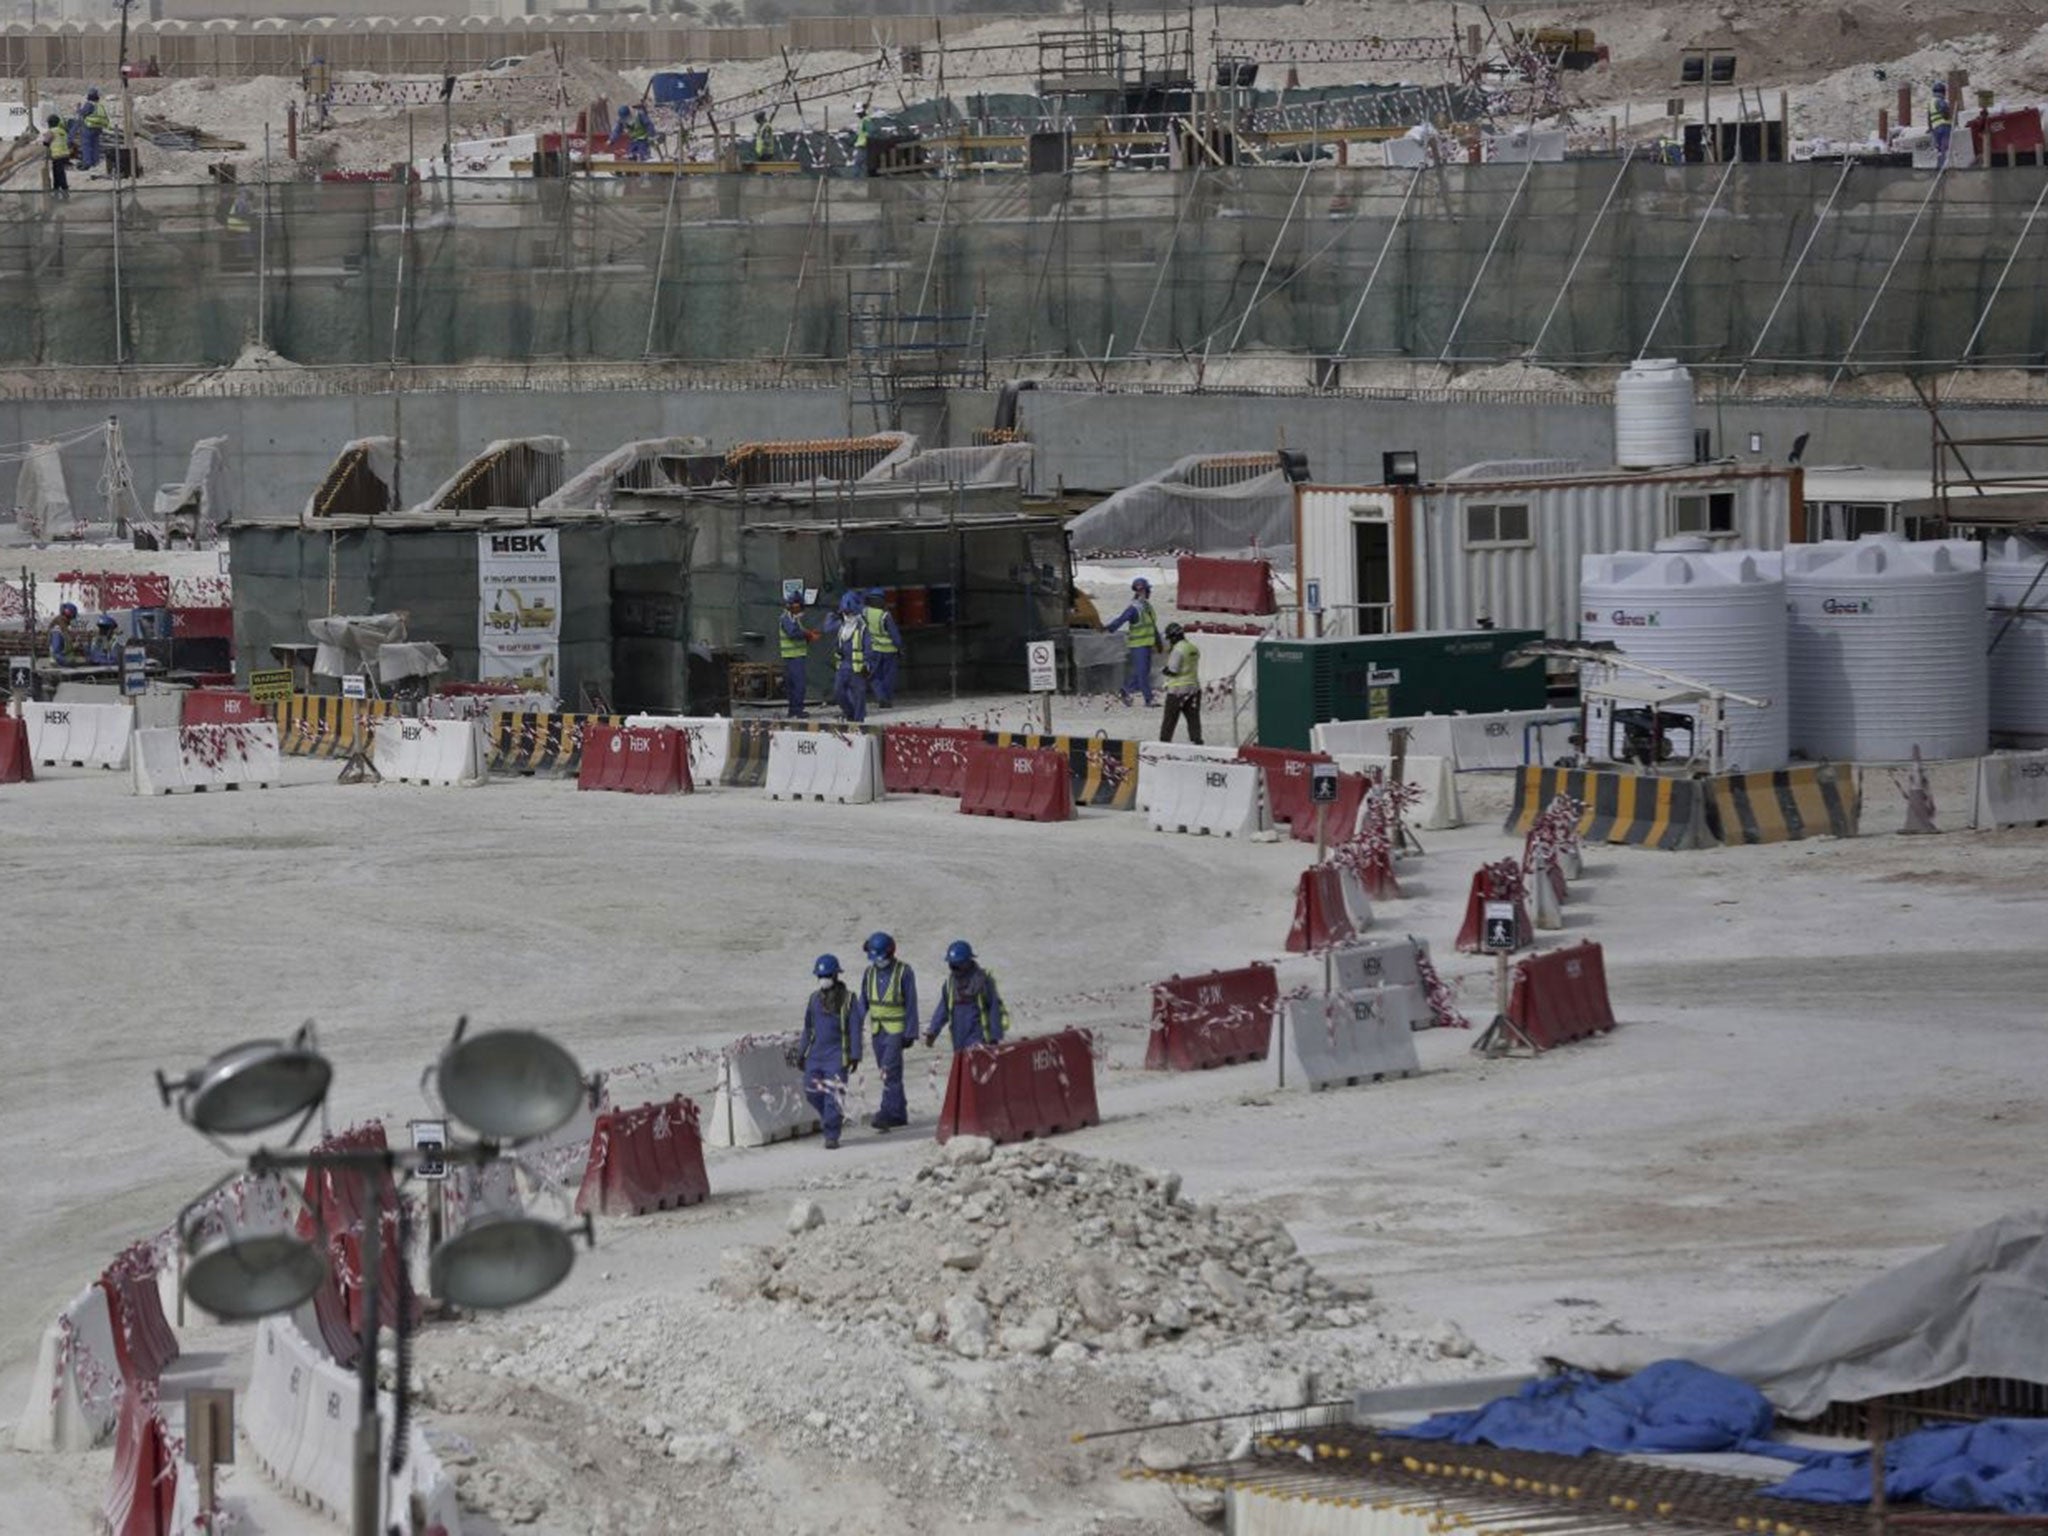 Working conditions at Qatar 2022 venues have been under intense scrutiny